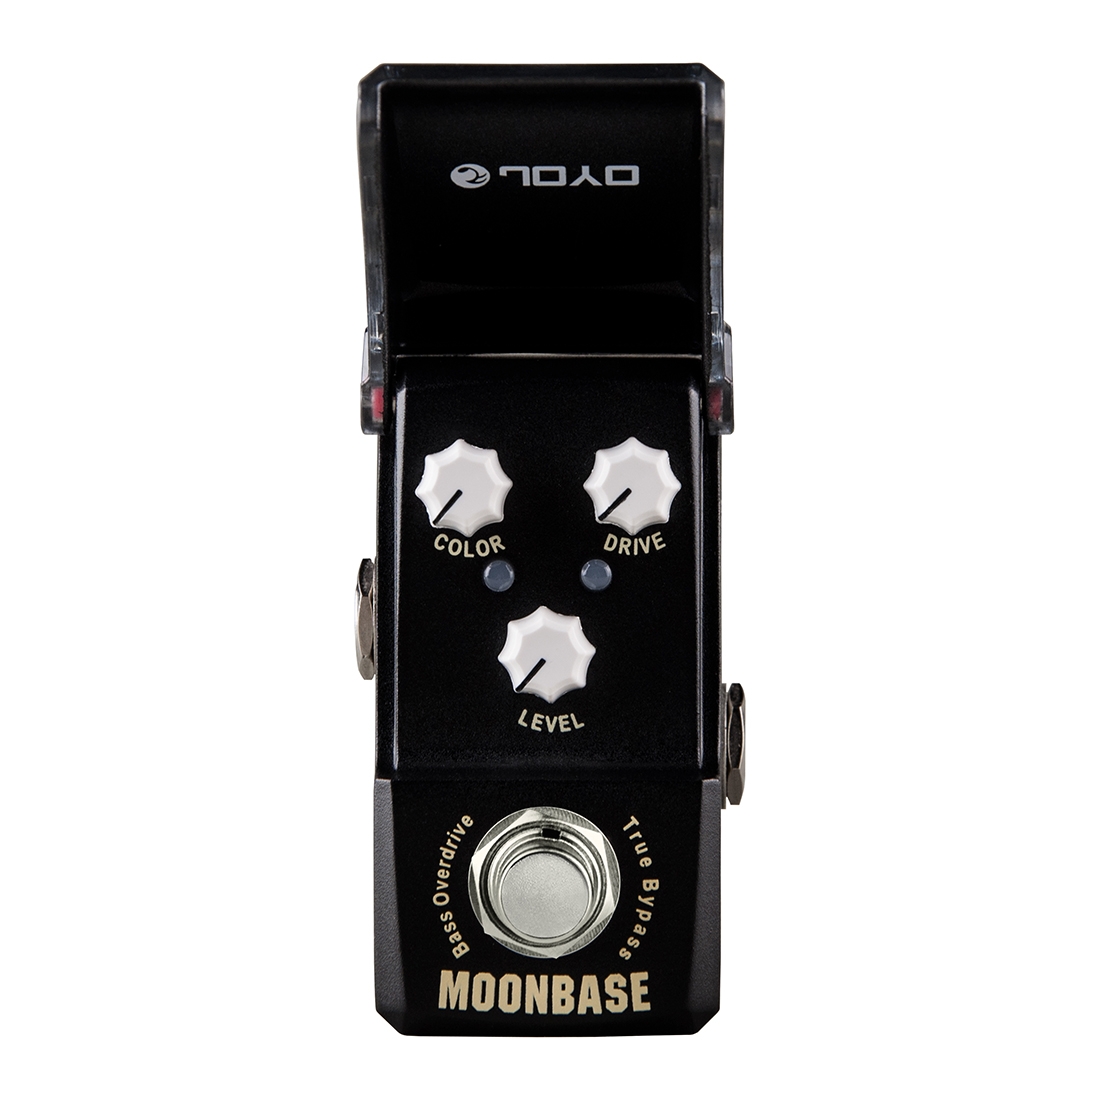 JOYO JF-332 Moonbase Bass Overdrive Effect Guitar Pedal True Bypass Electric Guitar Effect Pedal Suitable for Jazz Blues Musical